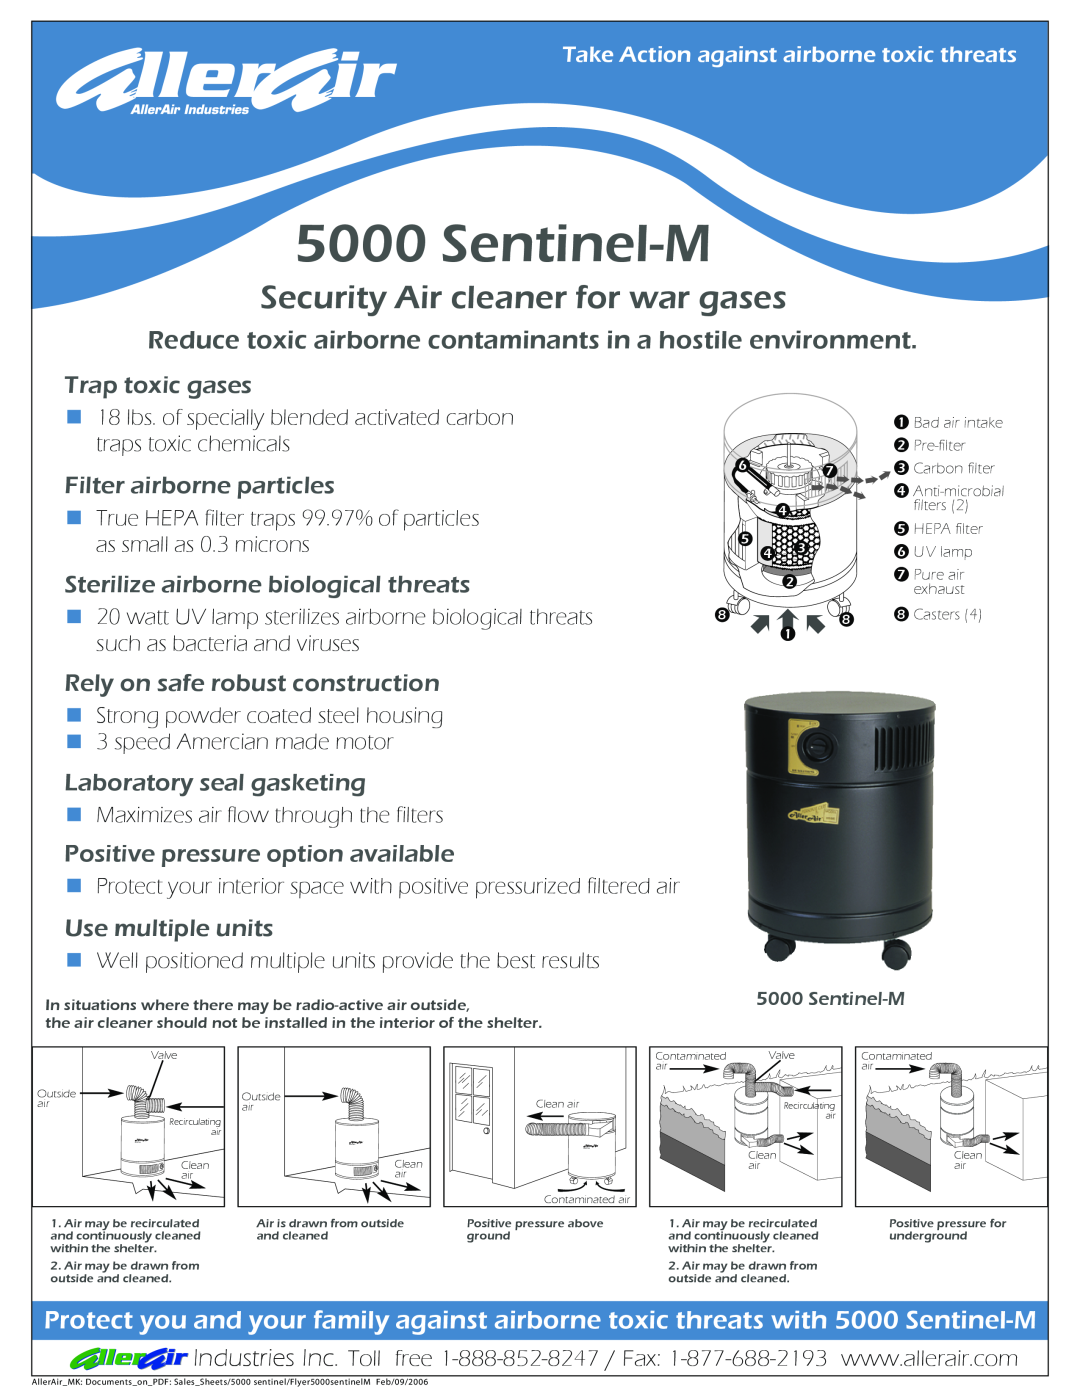 AllerAir 5000 Sentinel-M manual Trap toxic gases, Filter airborne particles, Sterilize airborne biological threats 